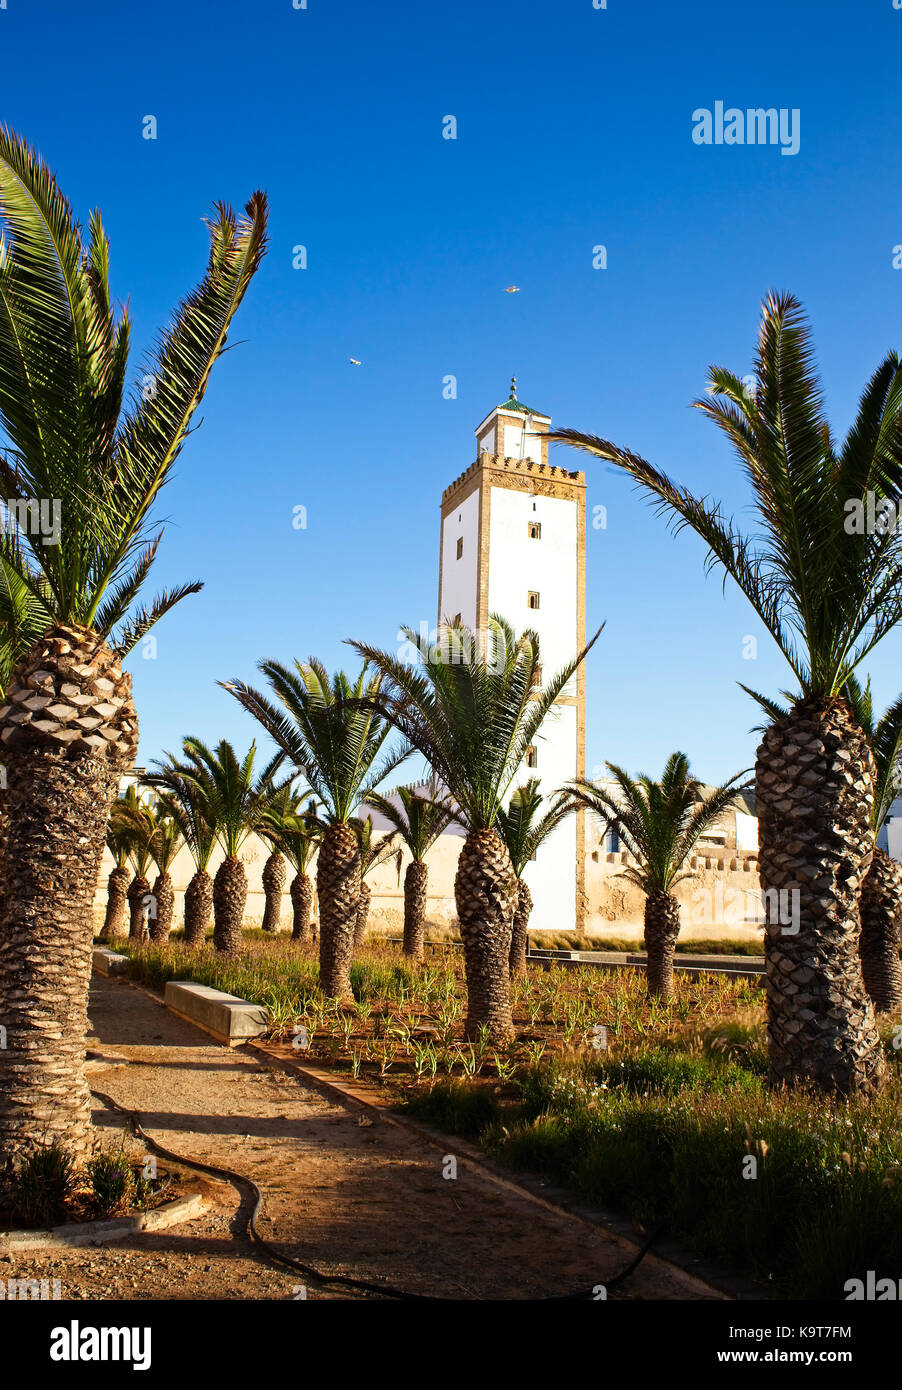 The tower for the Mosque Ben Youssef, Essaouira, Morocco. Stock Photo